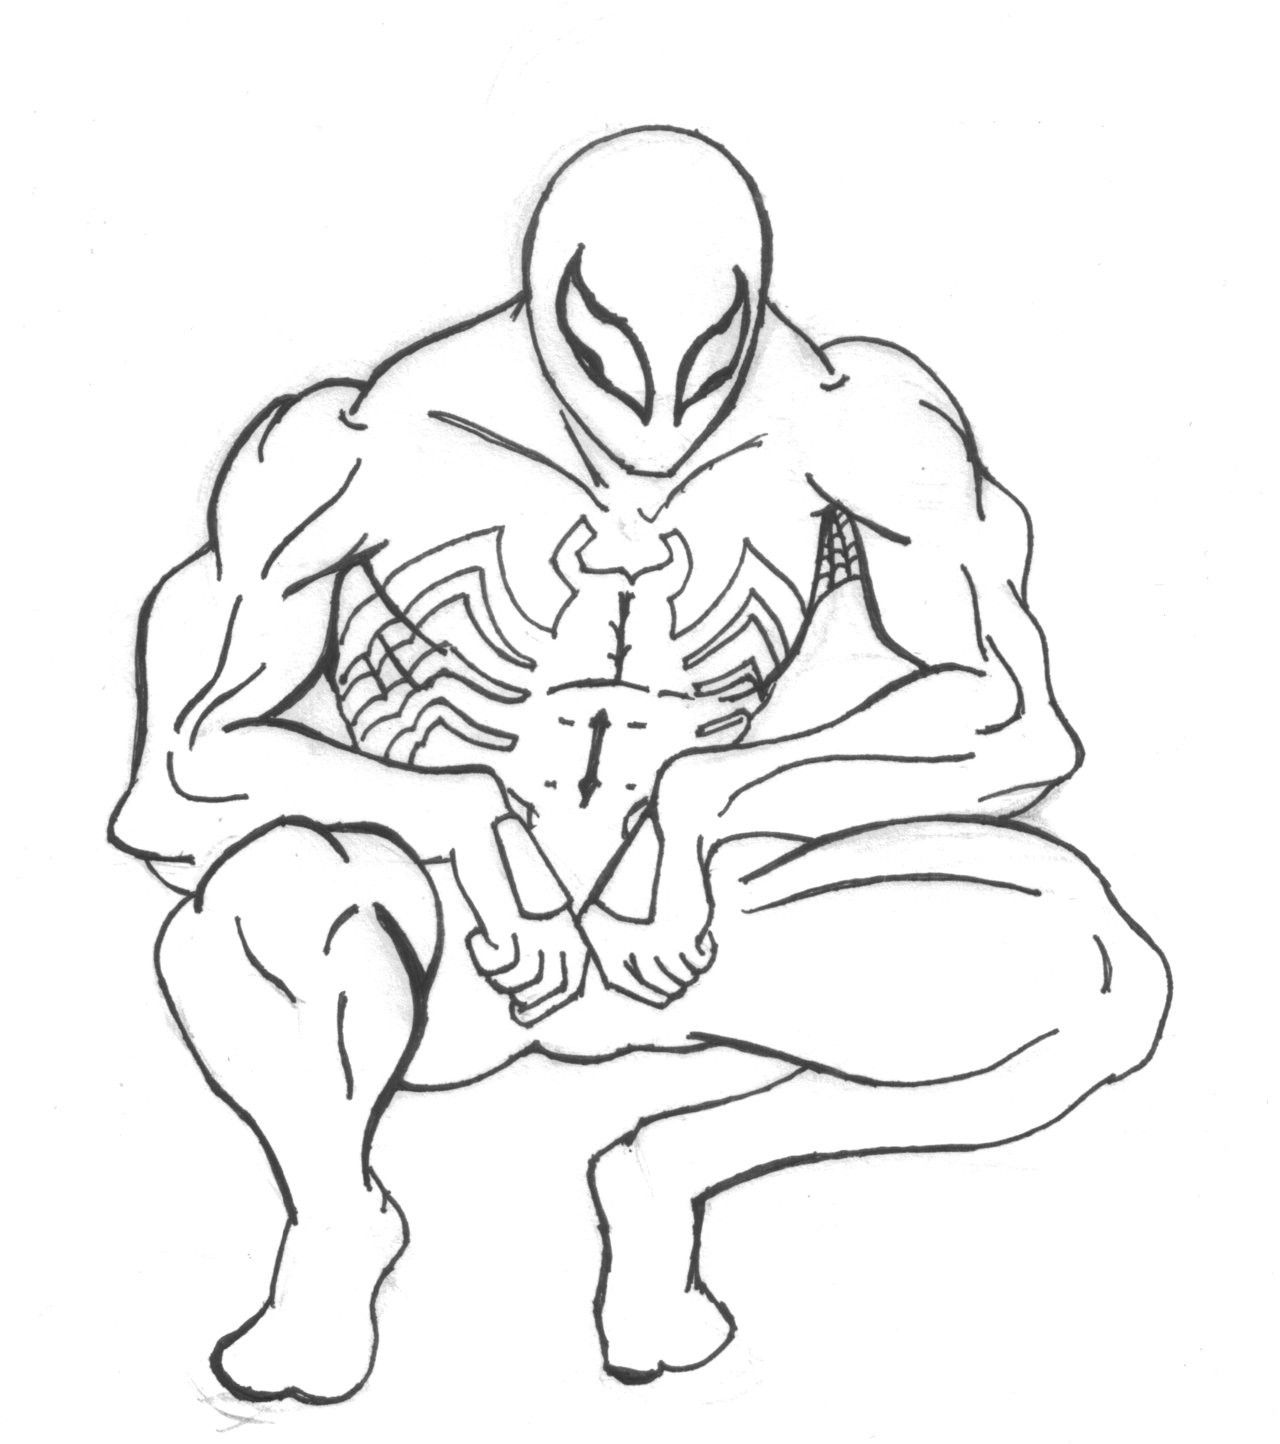 Black Spiderman Coloring Pictures - High Quality Coloring ...